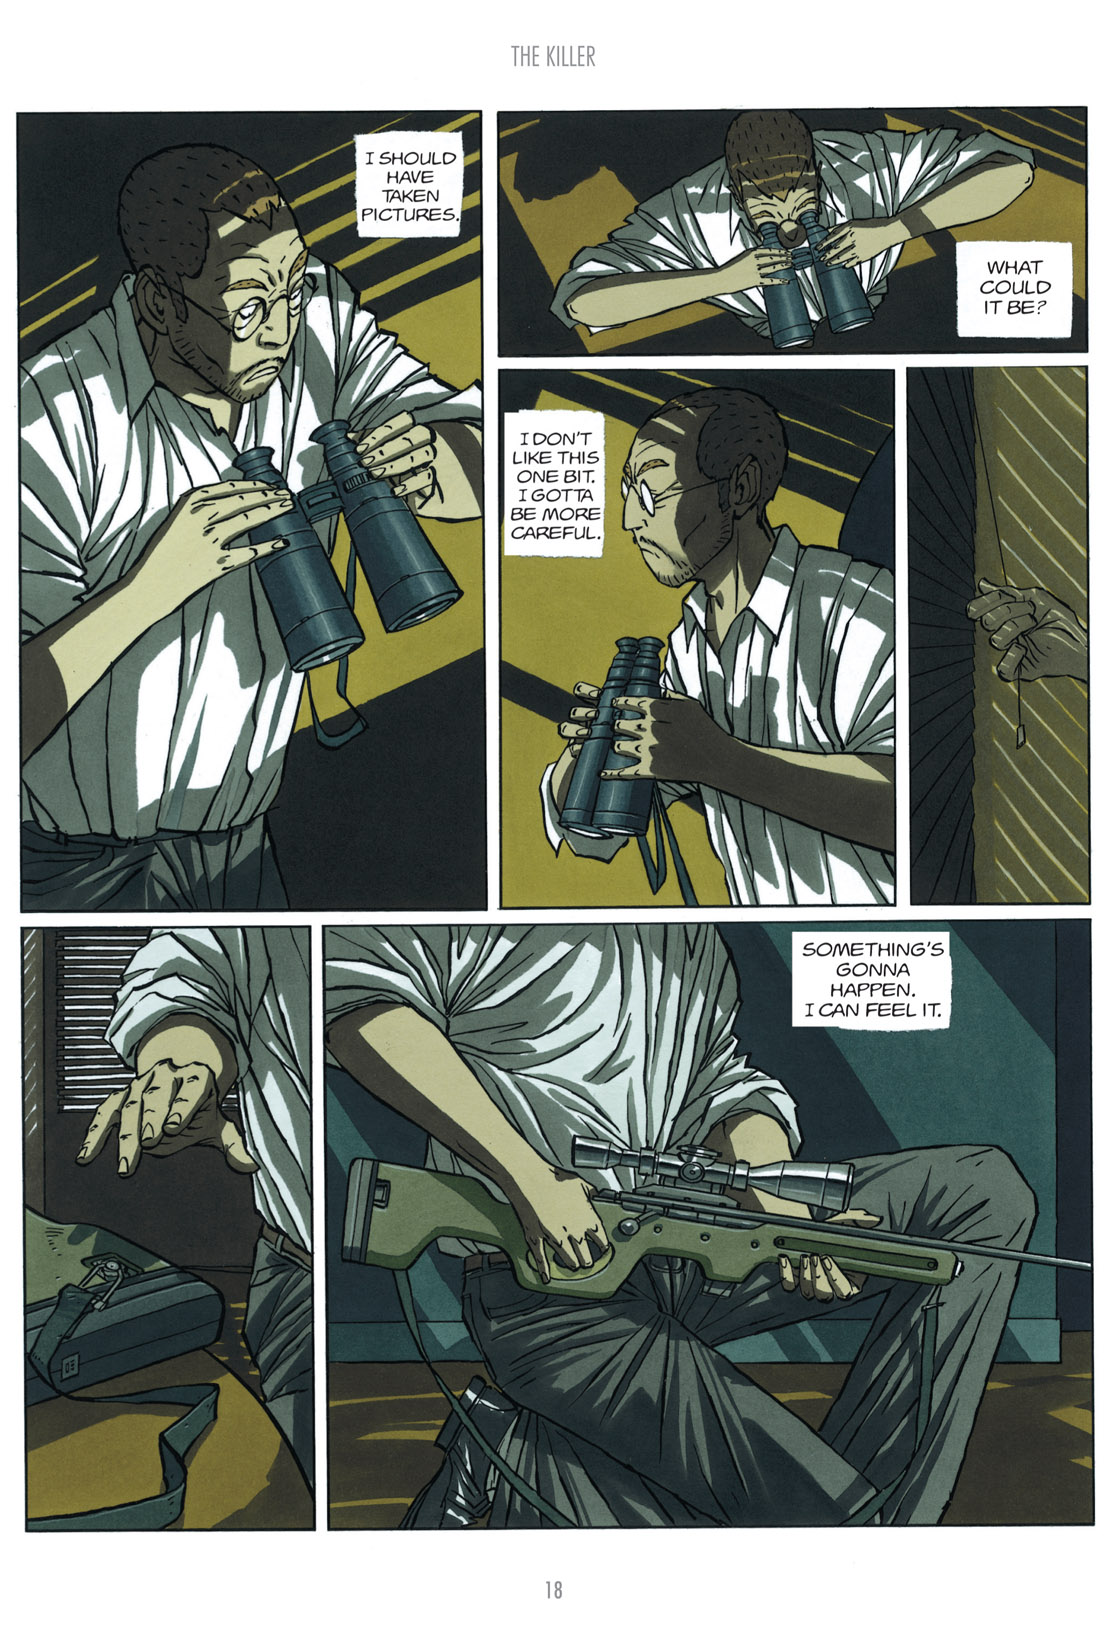 Read online The Killer comic -  Issue # TPB 1 - 57